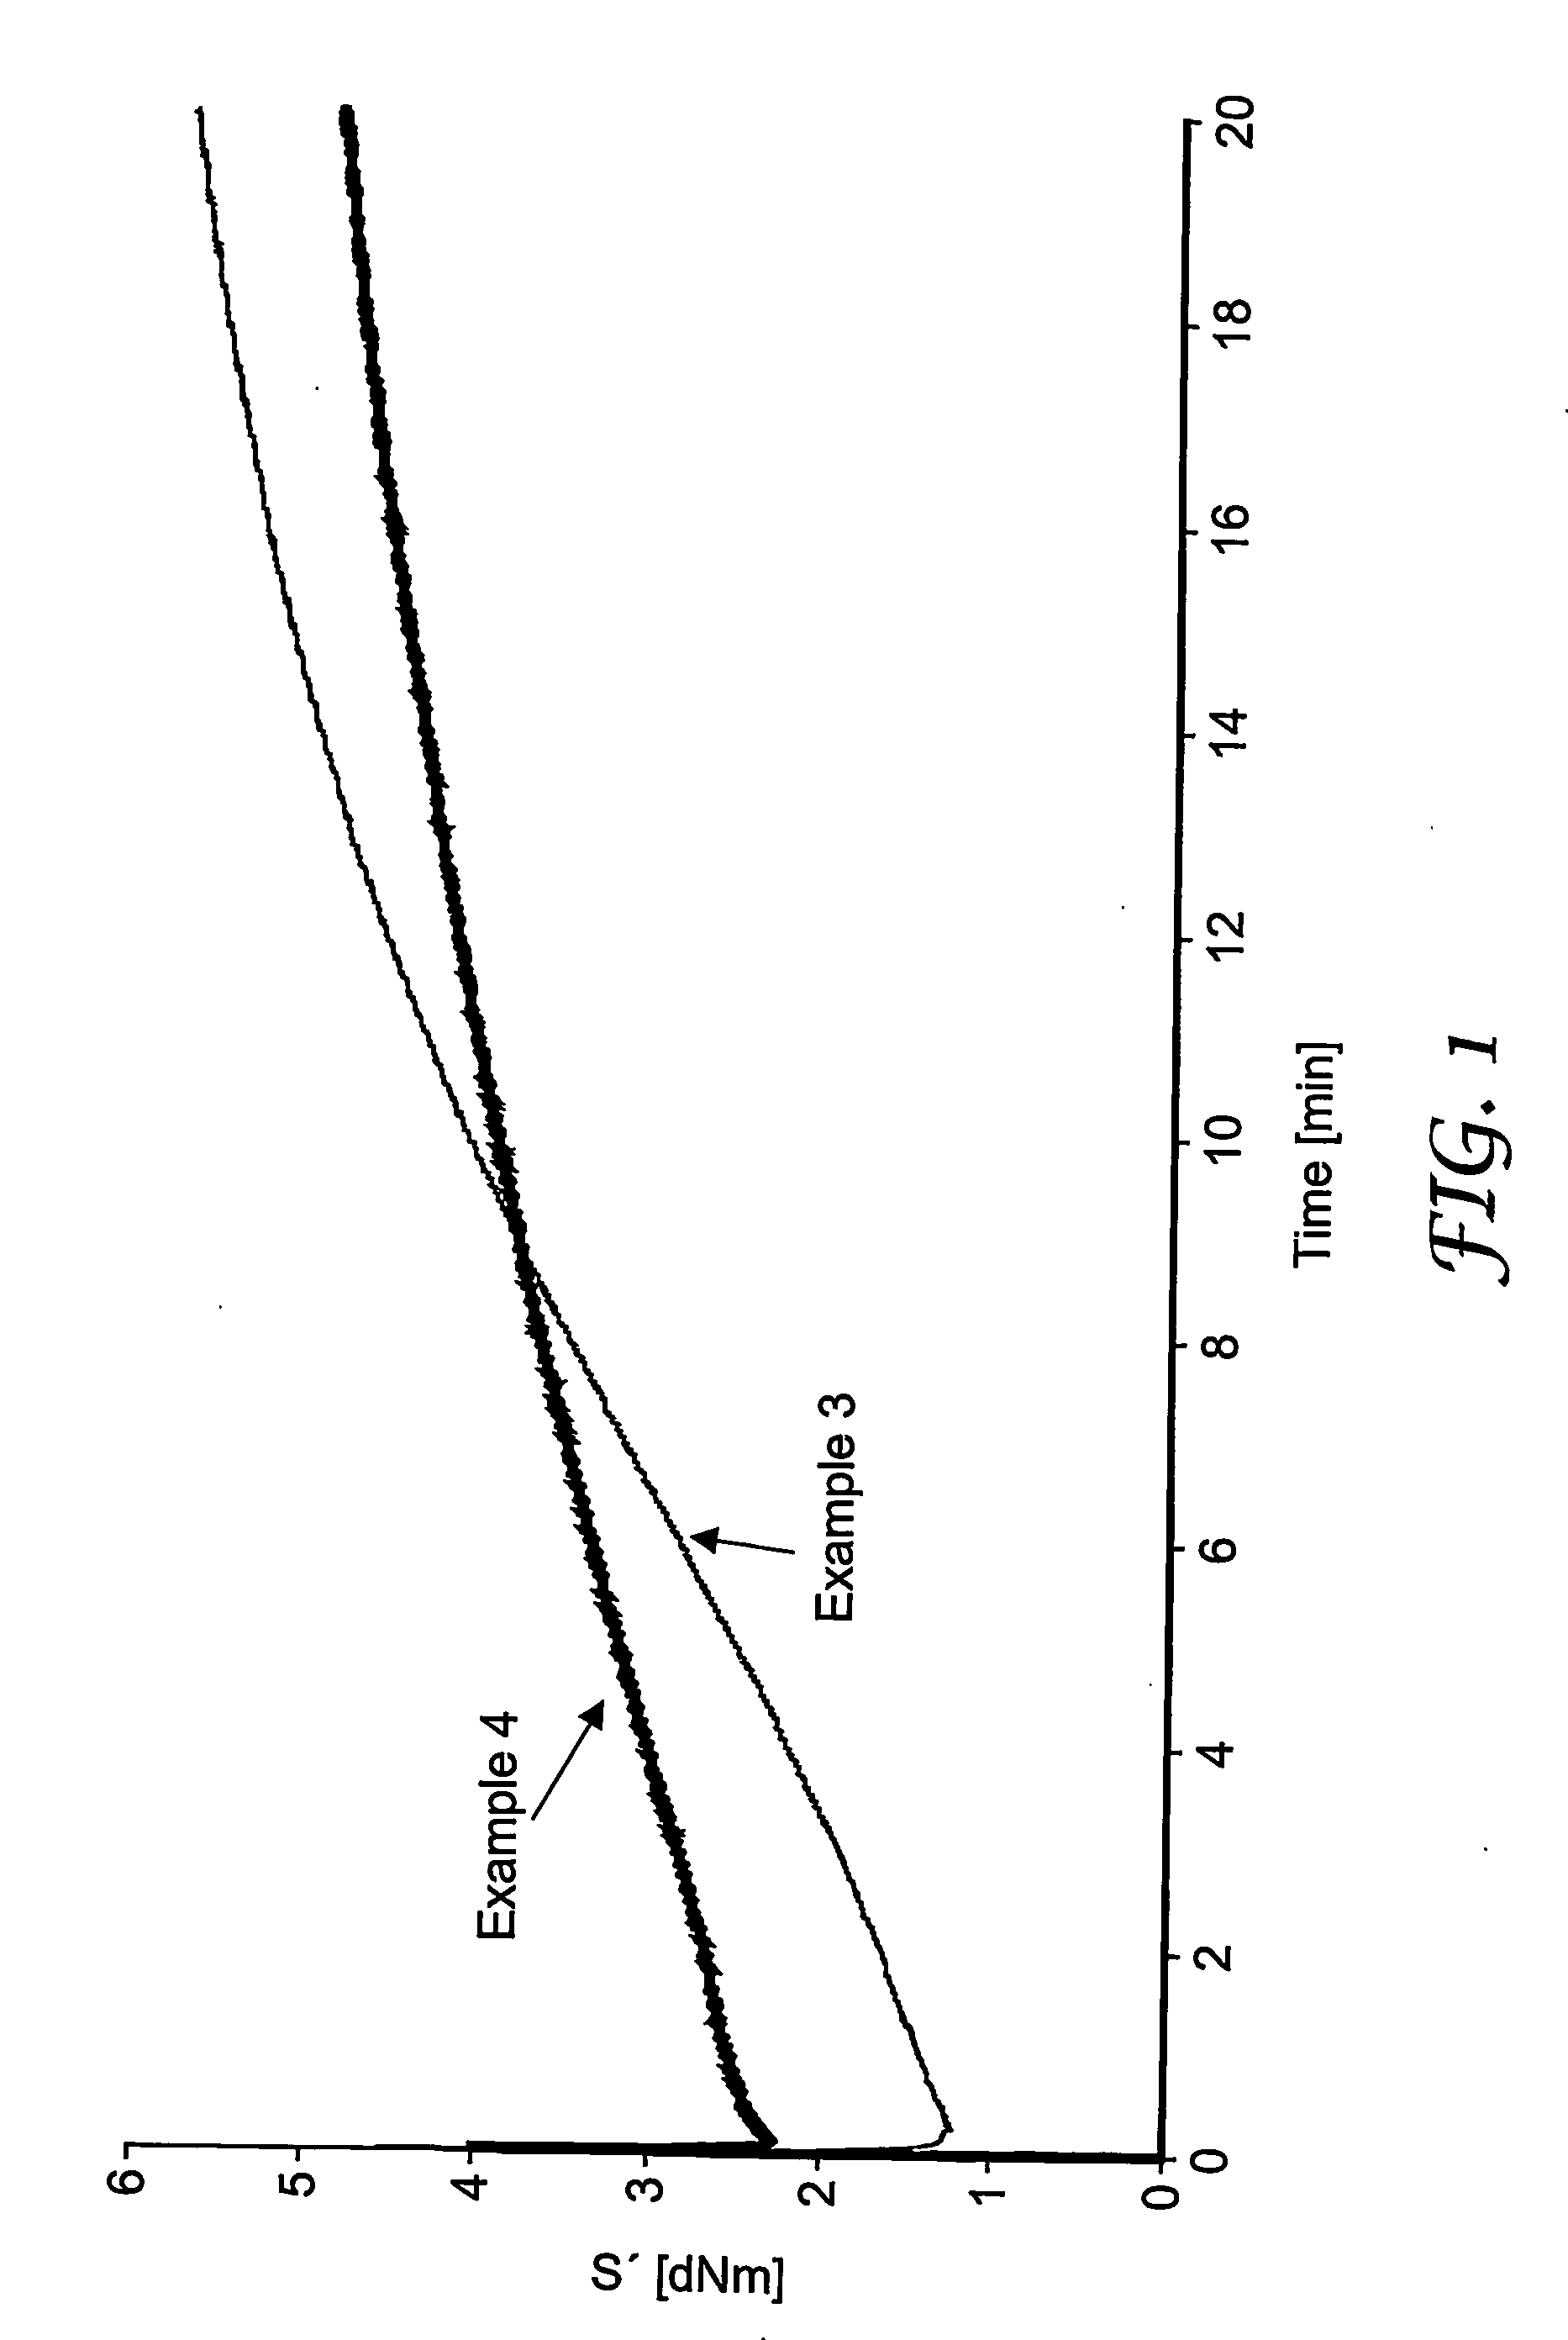 Thermally-formable and cross-linkable precursor of a thermally conductive material